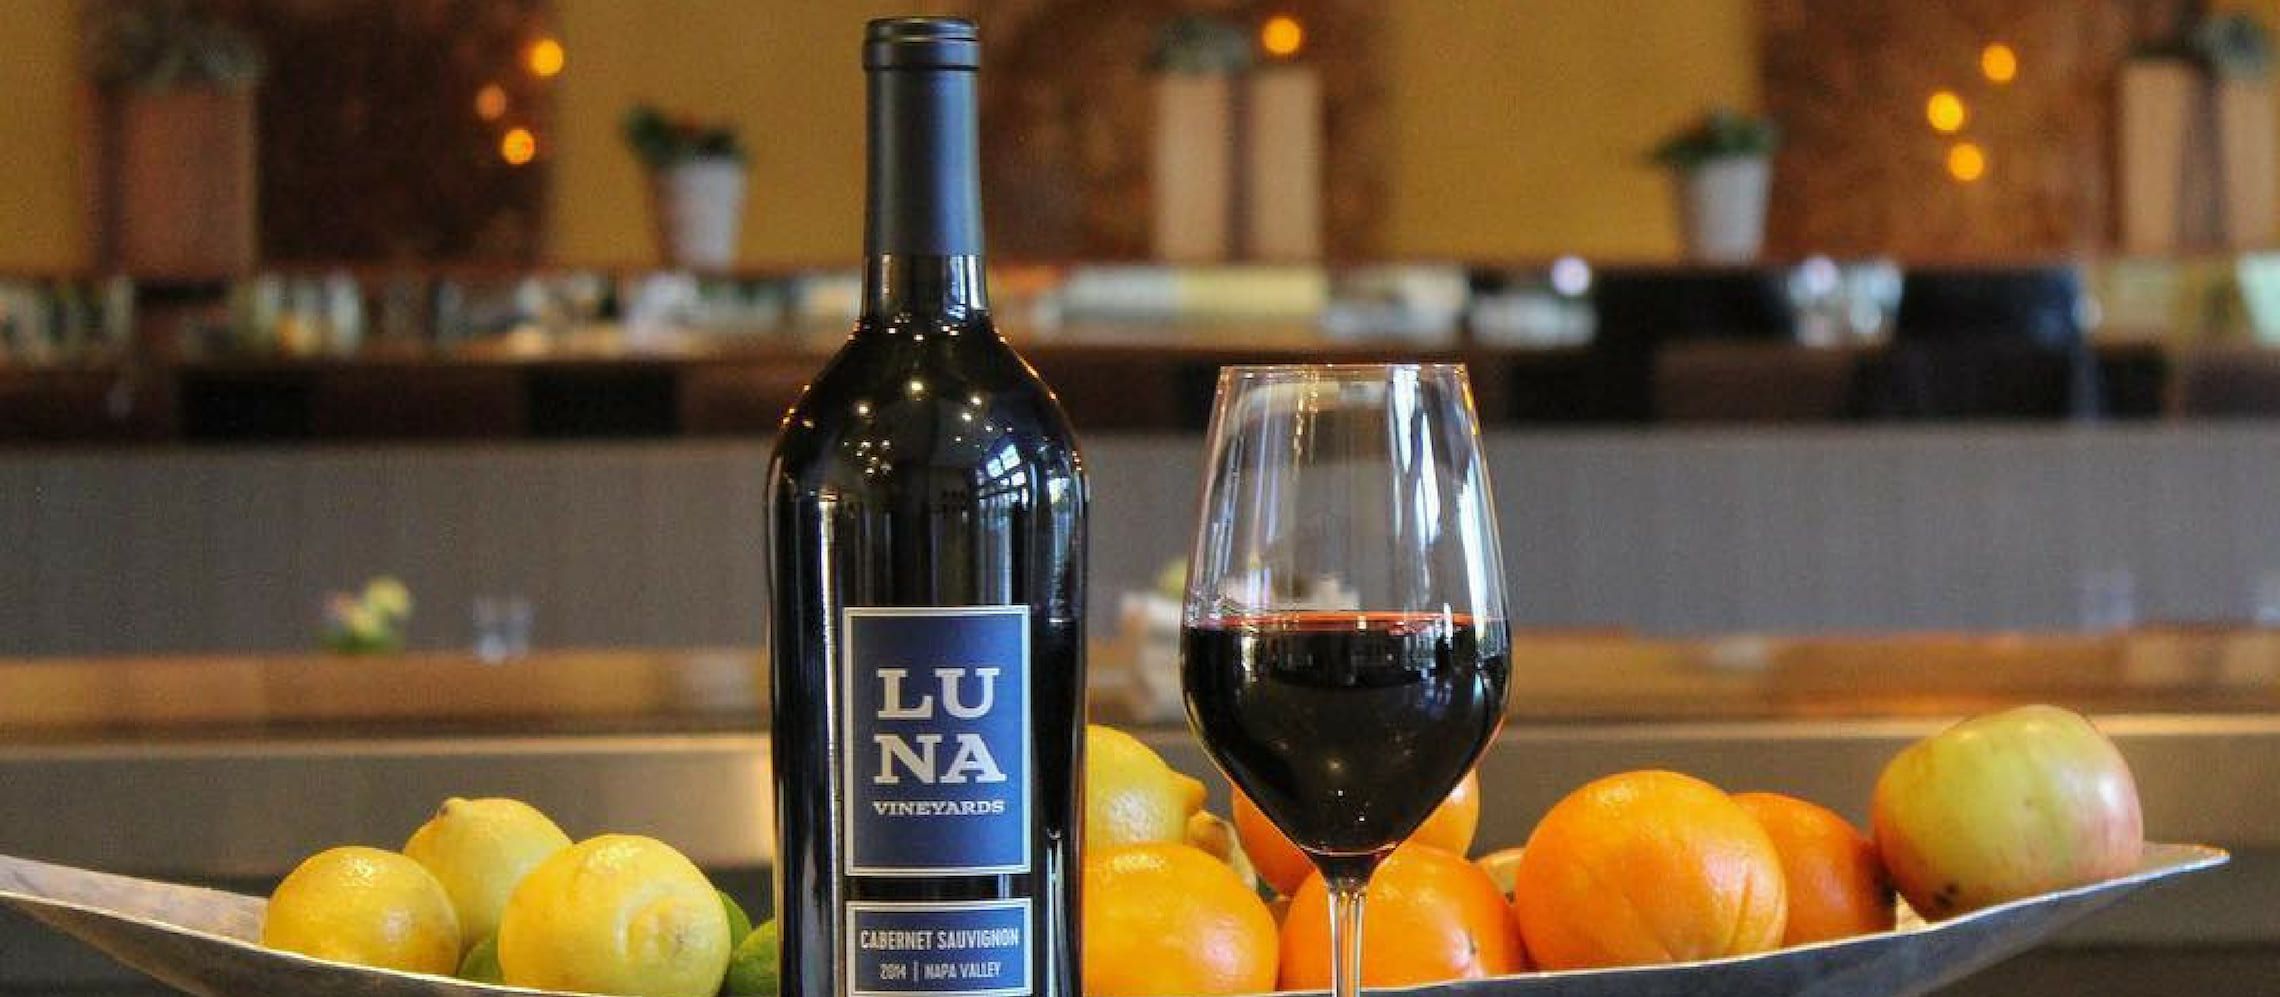 Photo for: Luna Vineyards Bags Four Awards at a Wine Competition